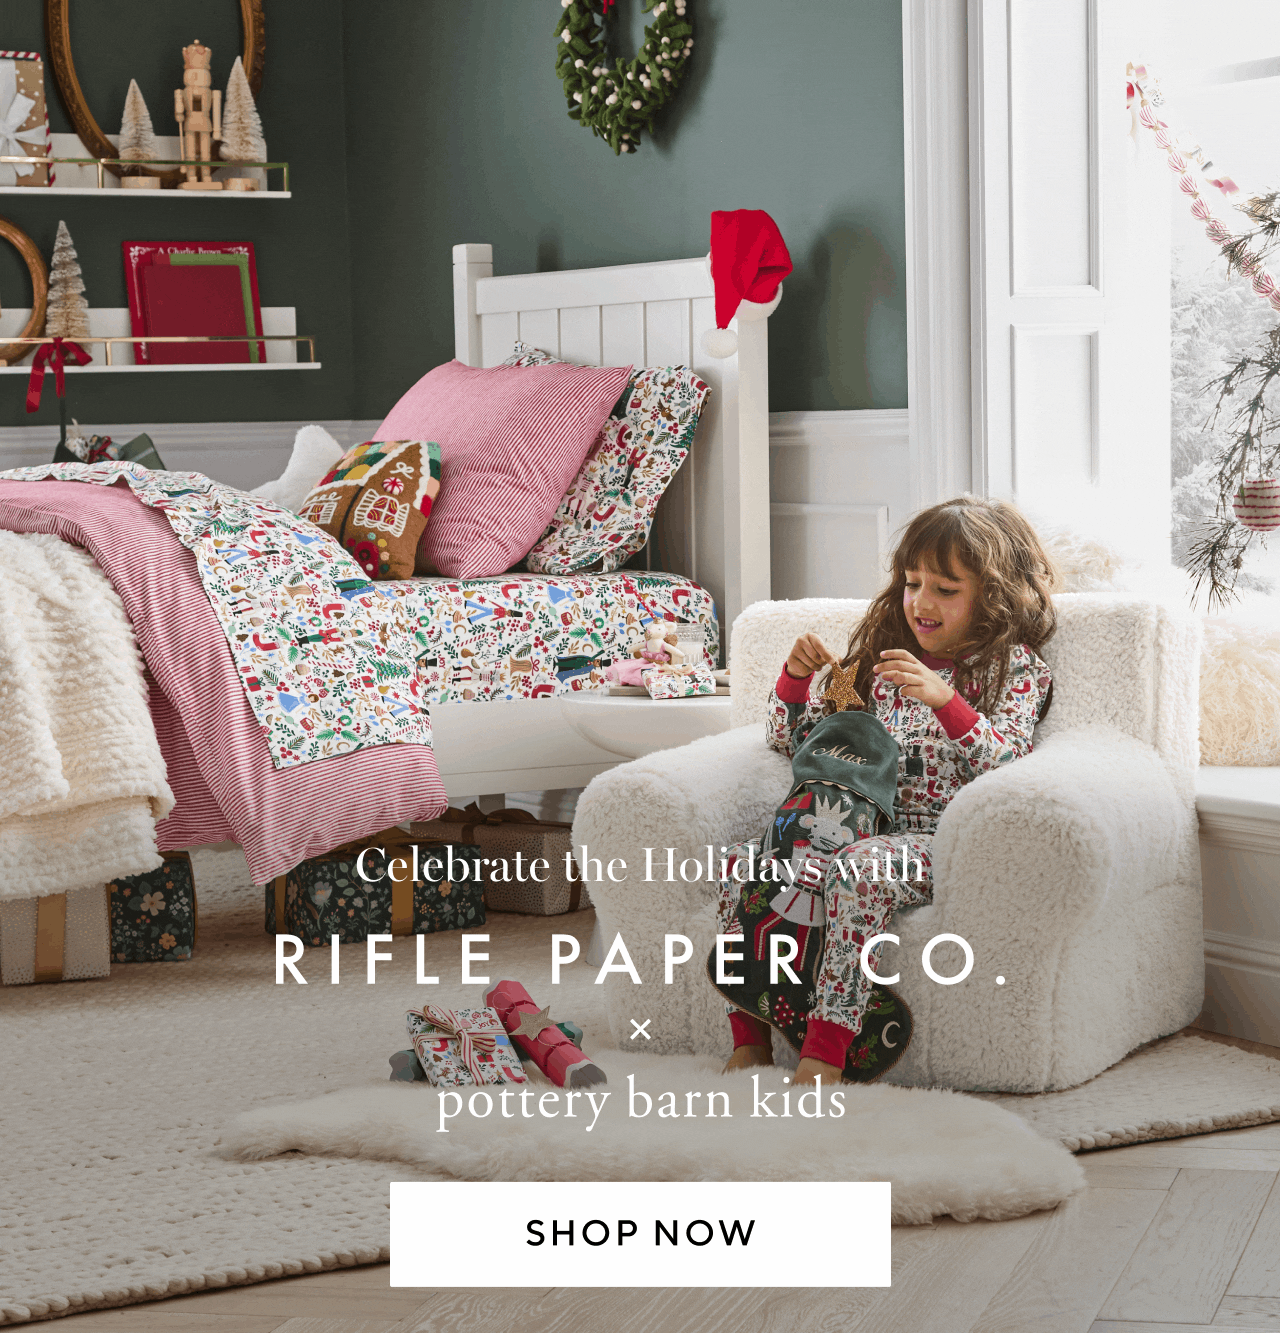 CELEBRATE THE HOLIDAYS WITH RIFLE PAPER CO. X POTTERY BARN KIDS